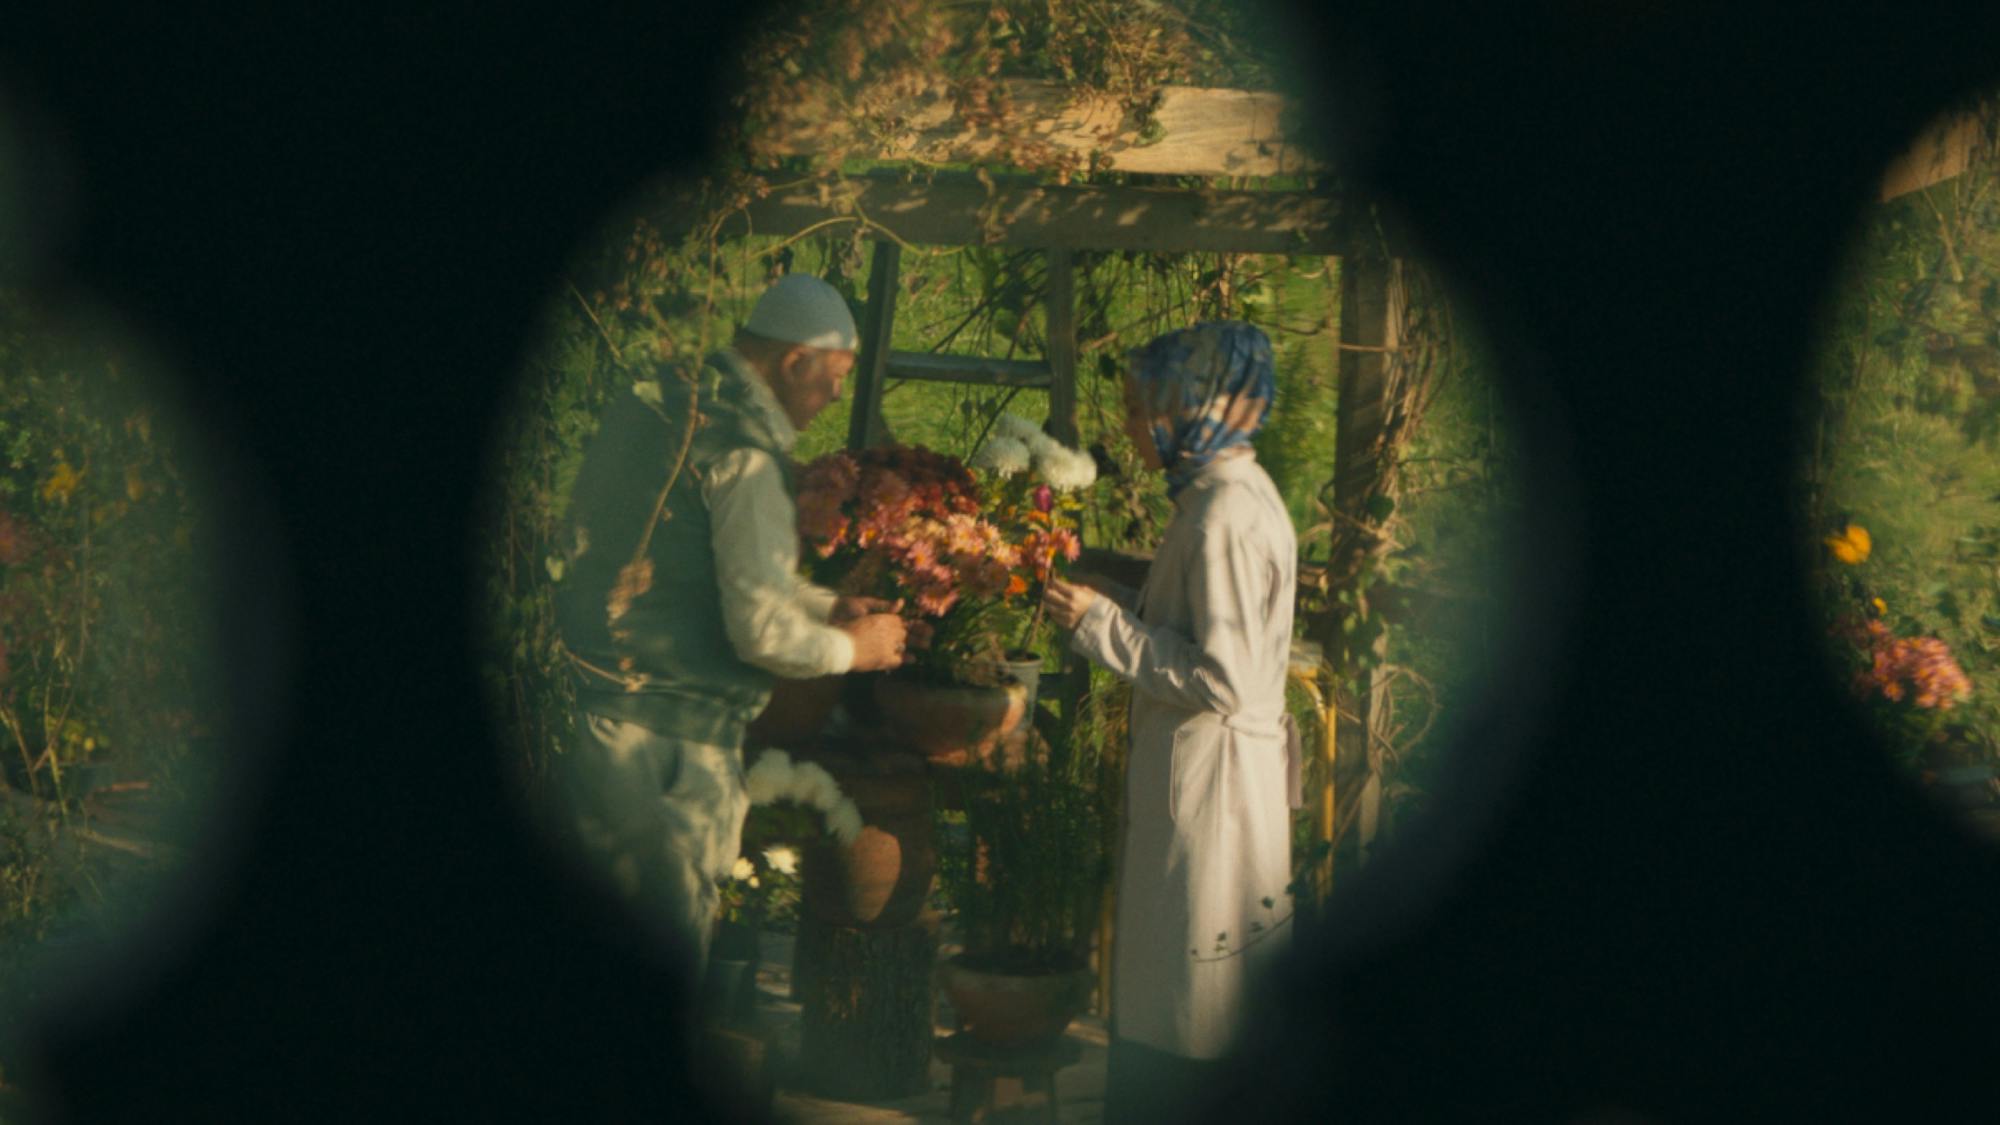 Meryem and her Hodja are seen through a fence, having a discussion over a planter of flowers in an idyllic green garden. 